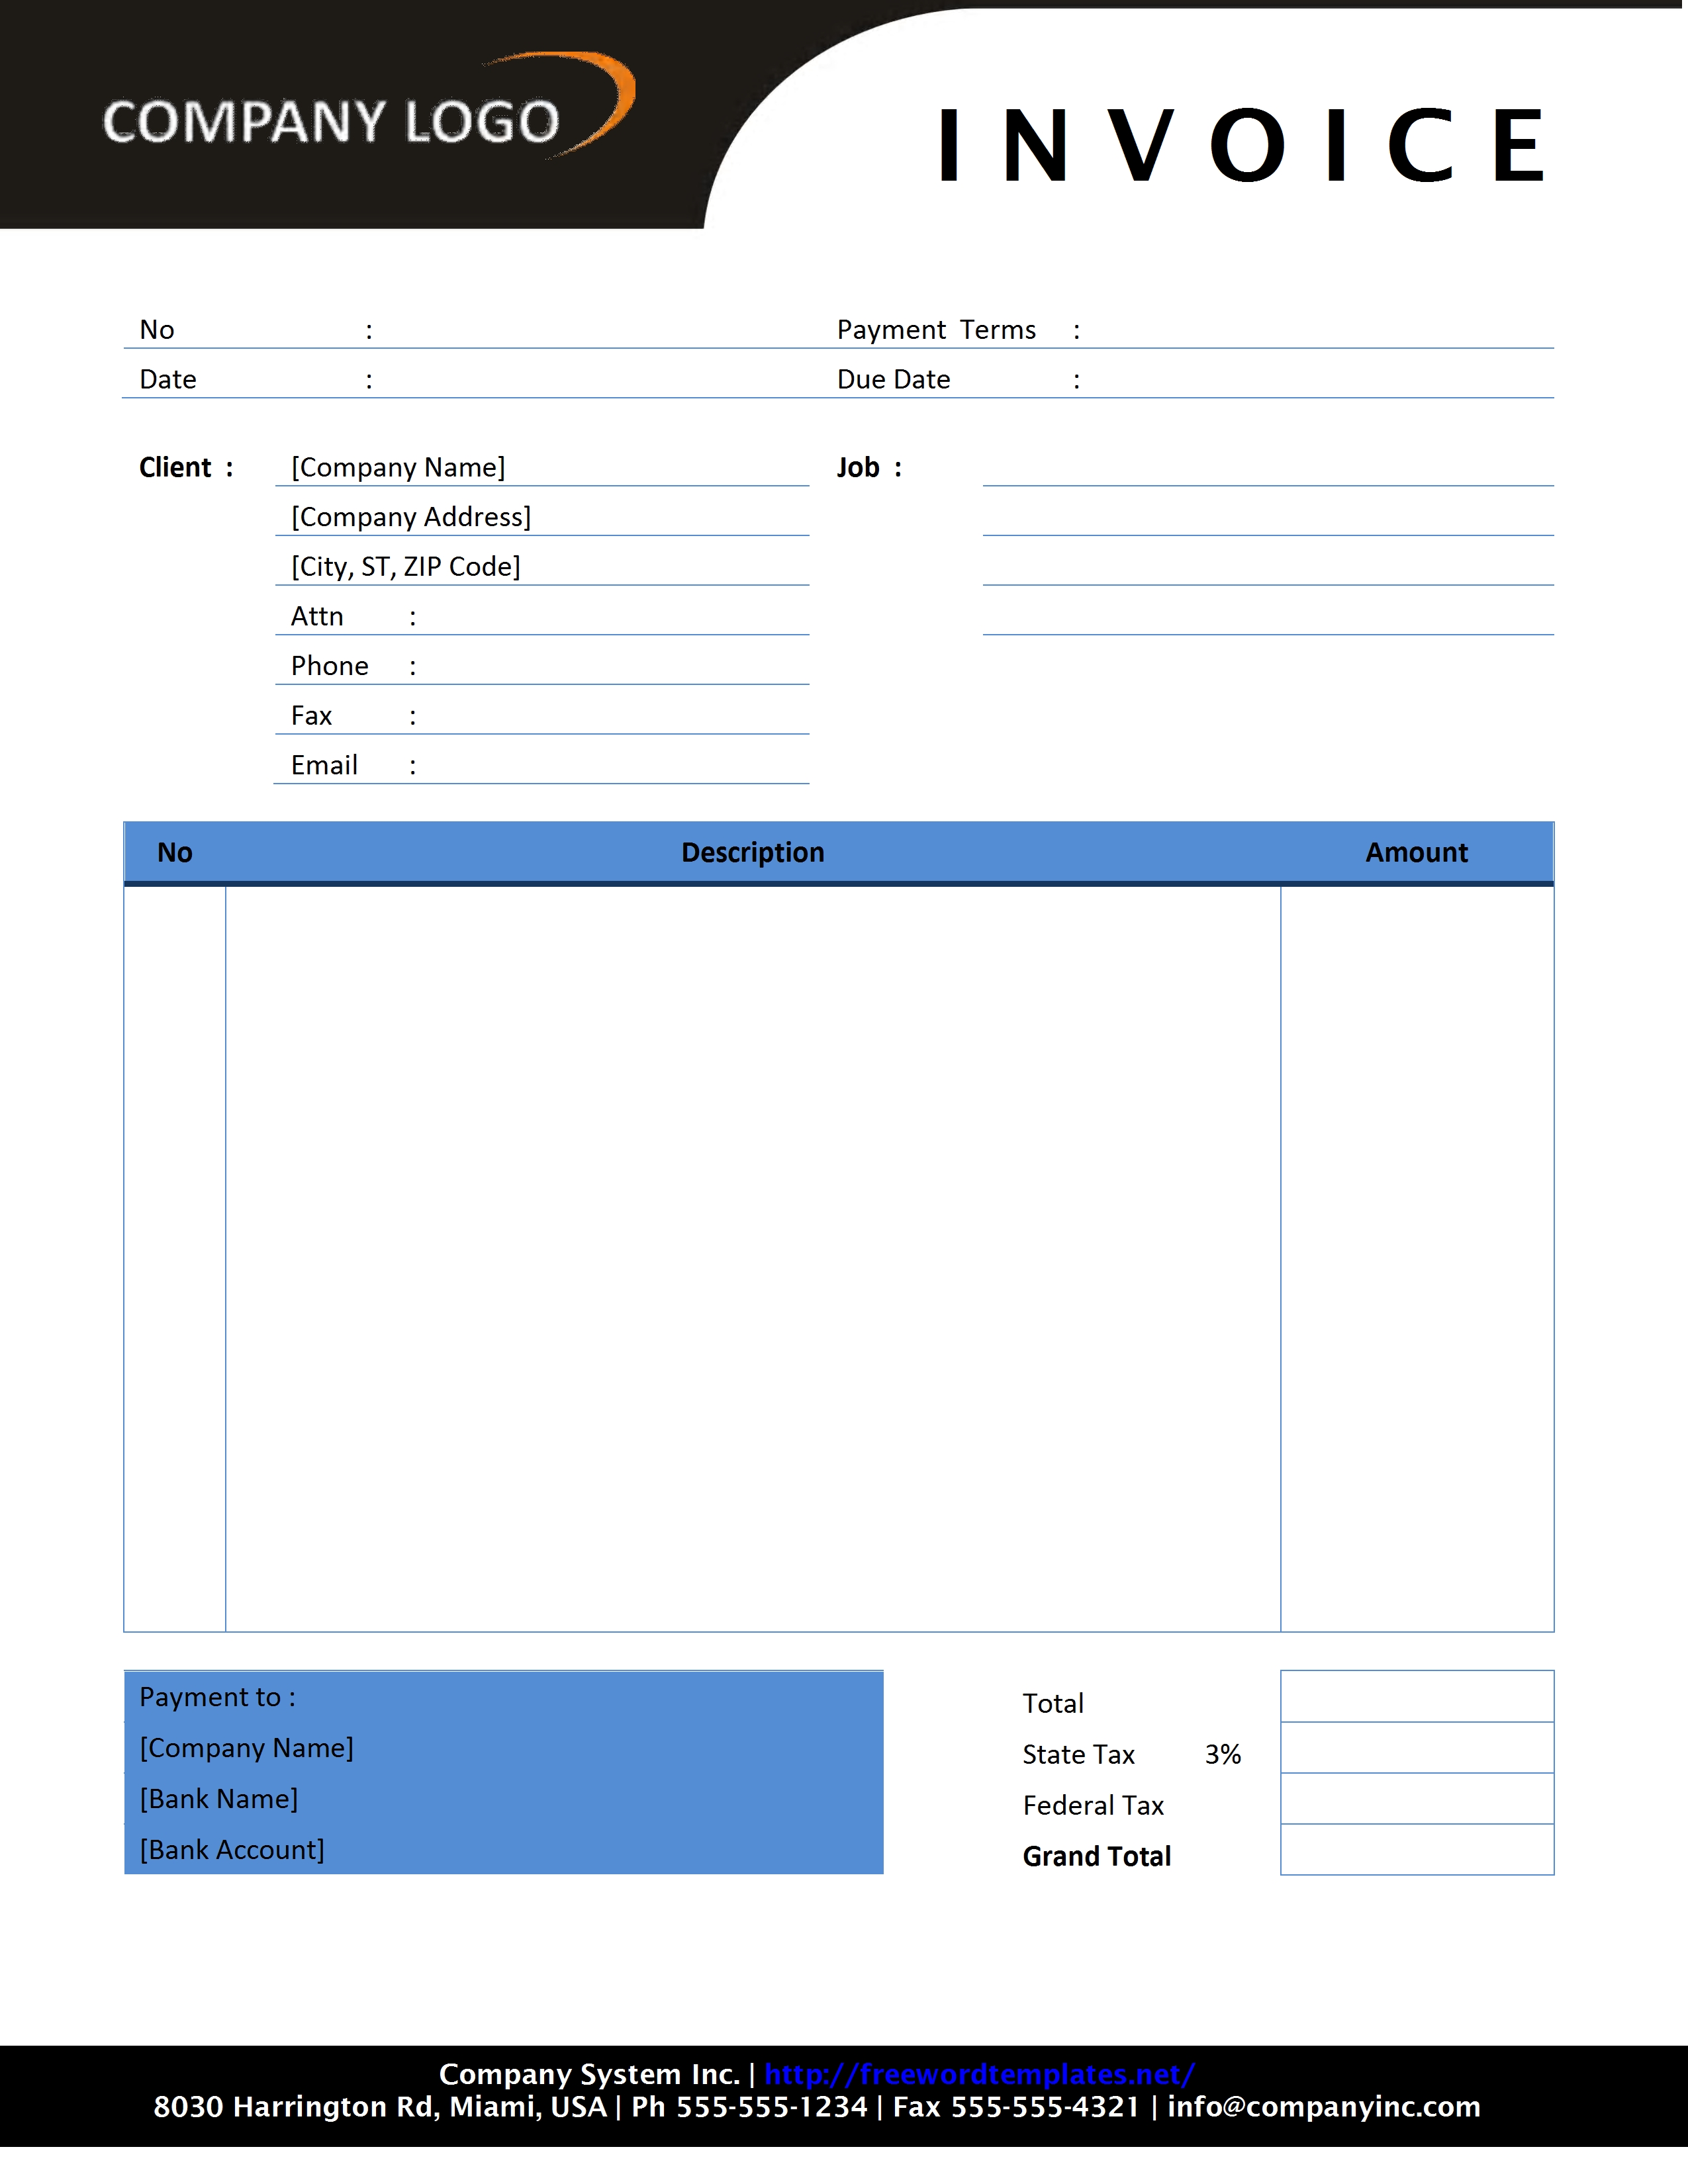 Freelance Invoice Template Microsoft Word | aboutplanning.org